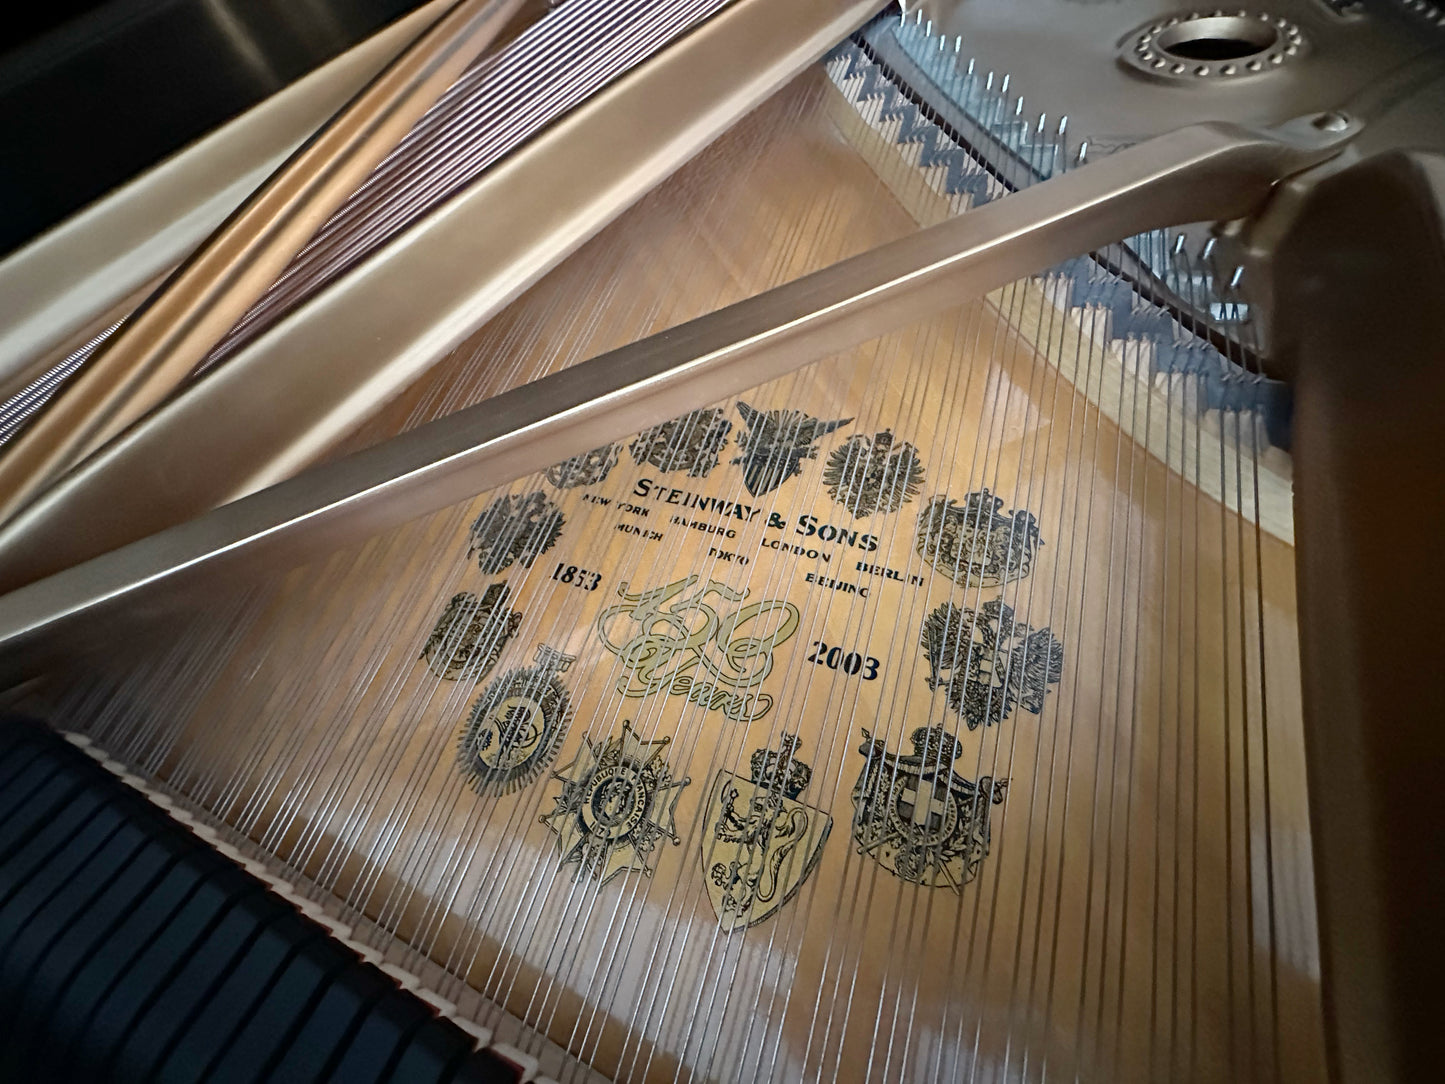 Steinway Model B | Henry Ziegler Limited Edition with Signature | 2003 (Purchased New in 2006)